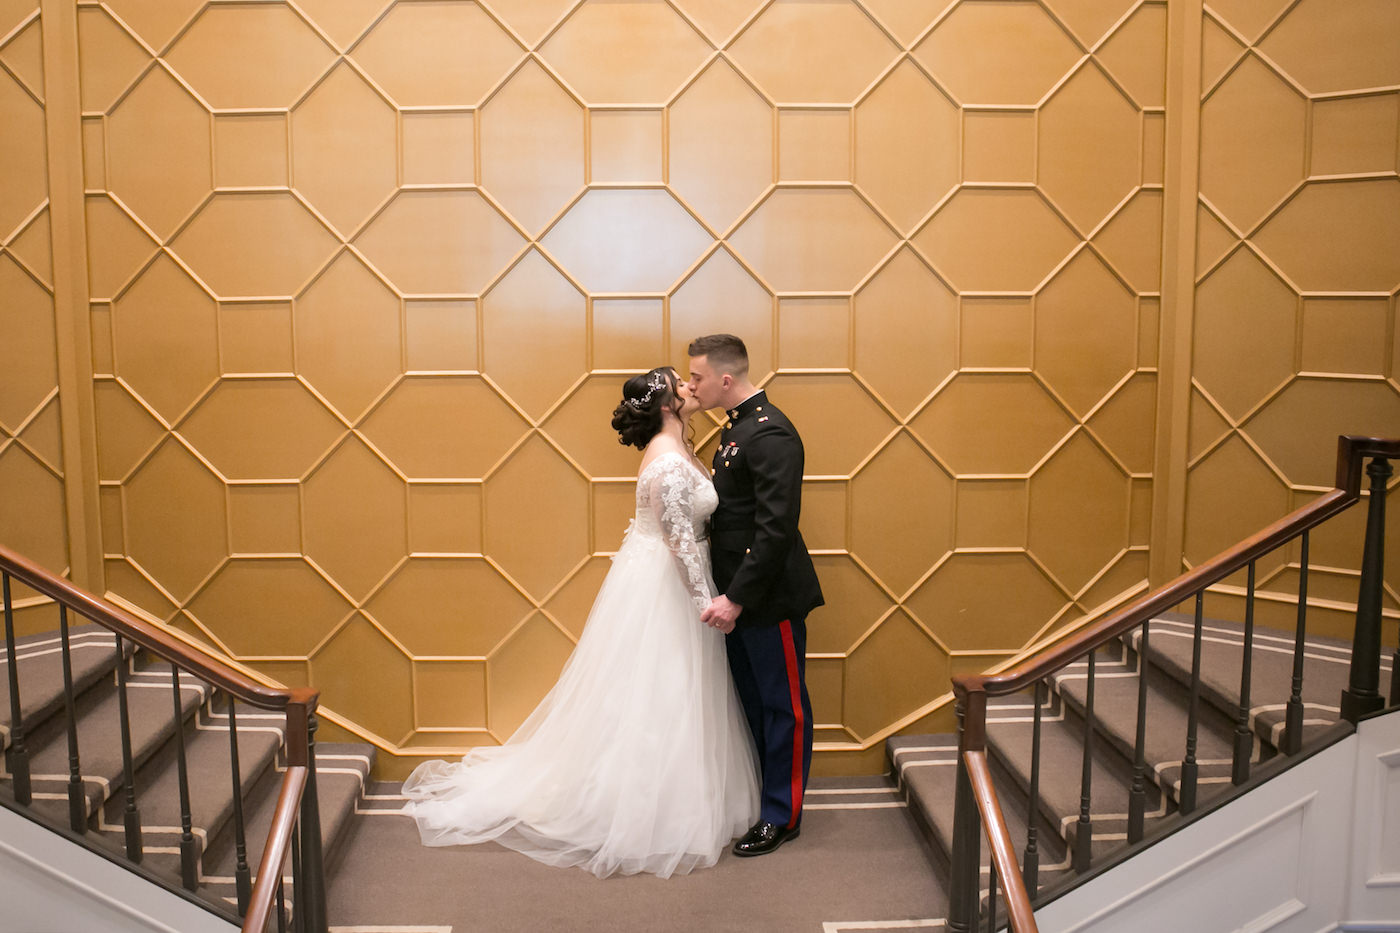 Romantic Bride in Whimsical Empire Waist Long Sleeve Lace and Tulle Wedding Dress and Military Groom in Dress Blues Uniform Kissing First Look Wedding Portrait on Staircase at Wedding Venue The Tampa Club | Wedding Photographer Carrie Wildes Photography